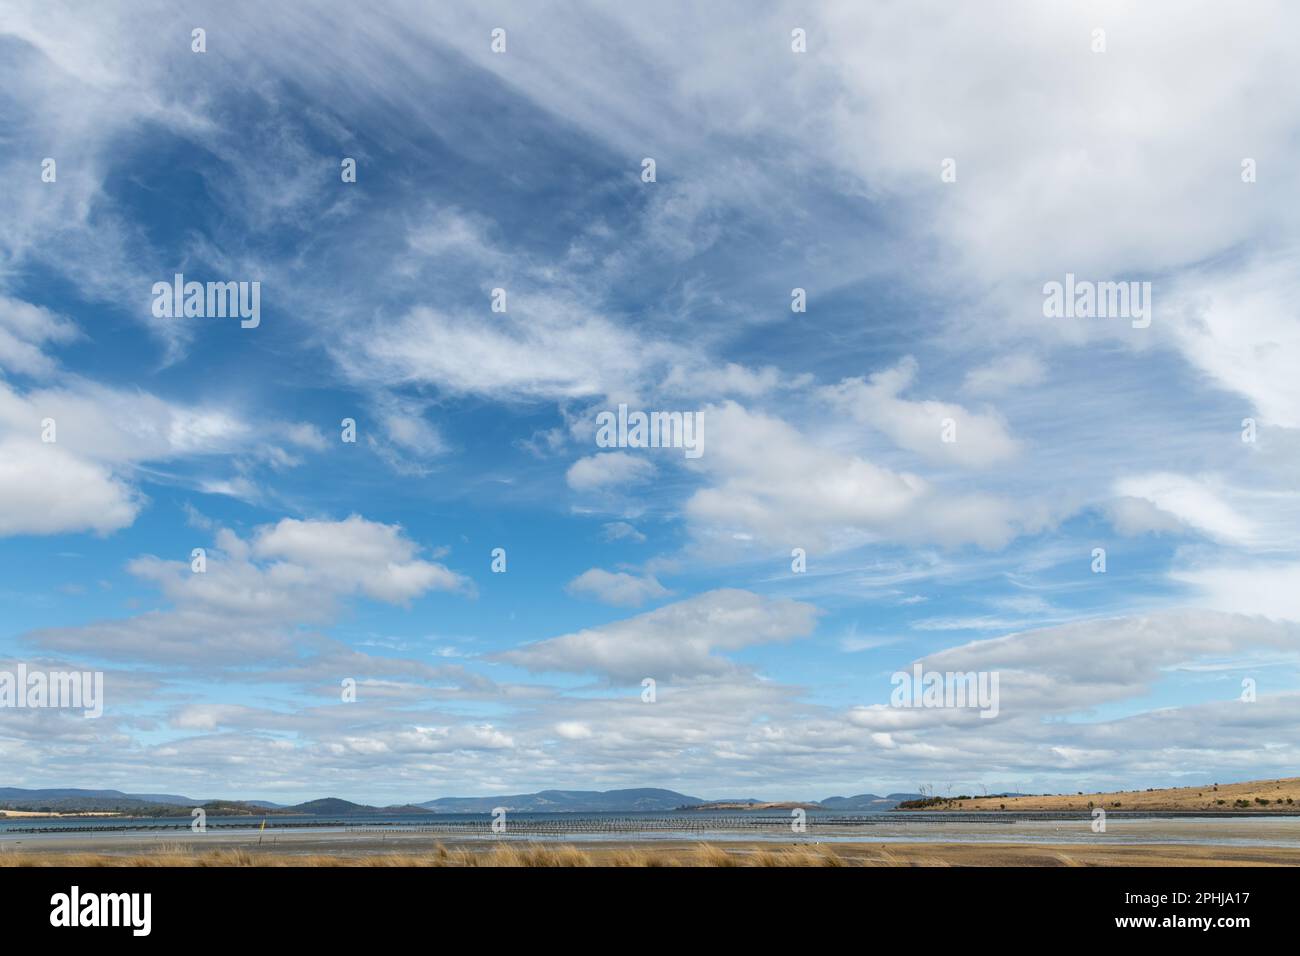 Large wispy sky in a landscape scene with oyster frames at low tide in Tasmania. sky replacement. Stock Photo